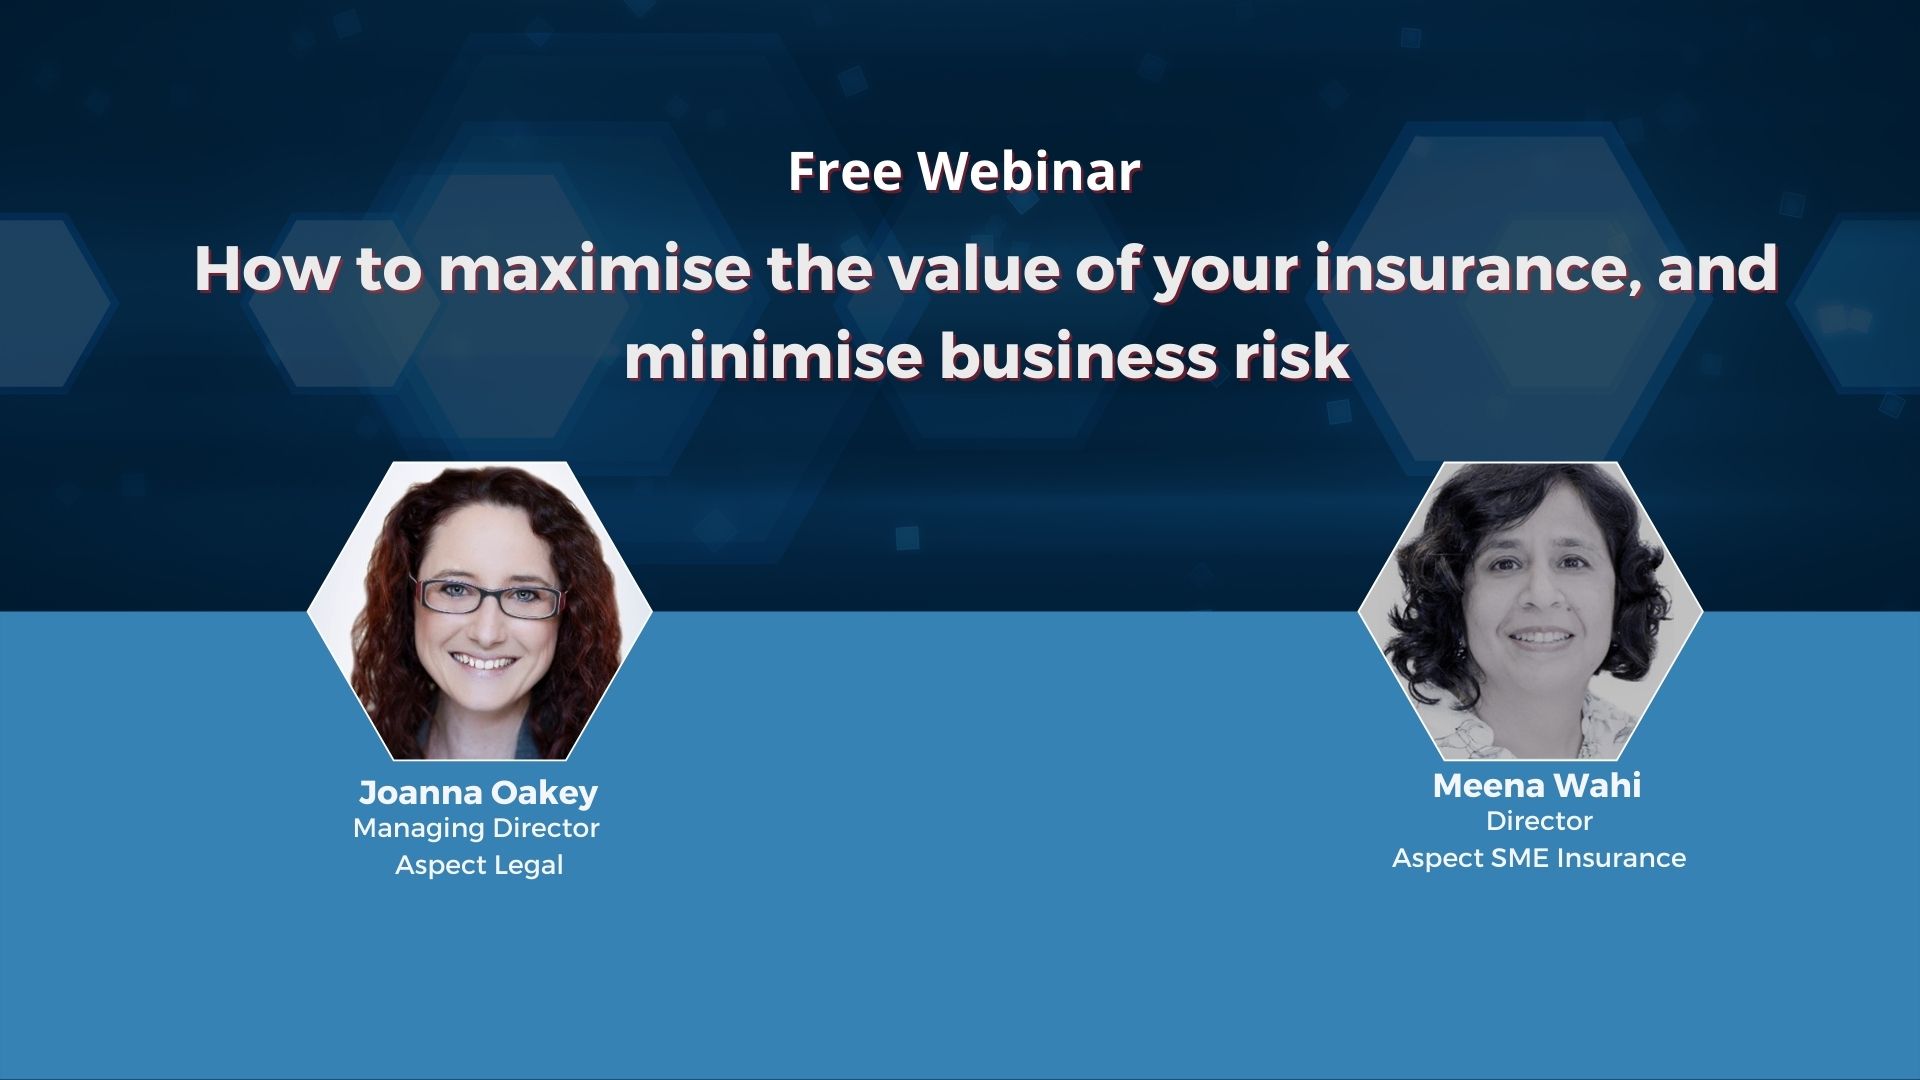 How to Maximise The Value of Your Insurance, and Minimise Business Risk